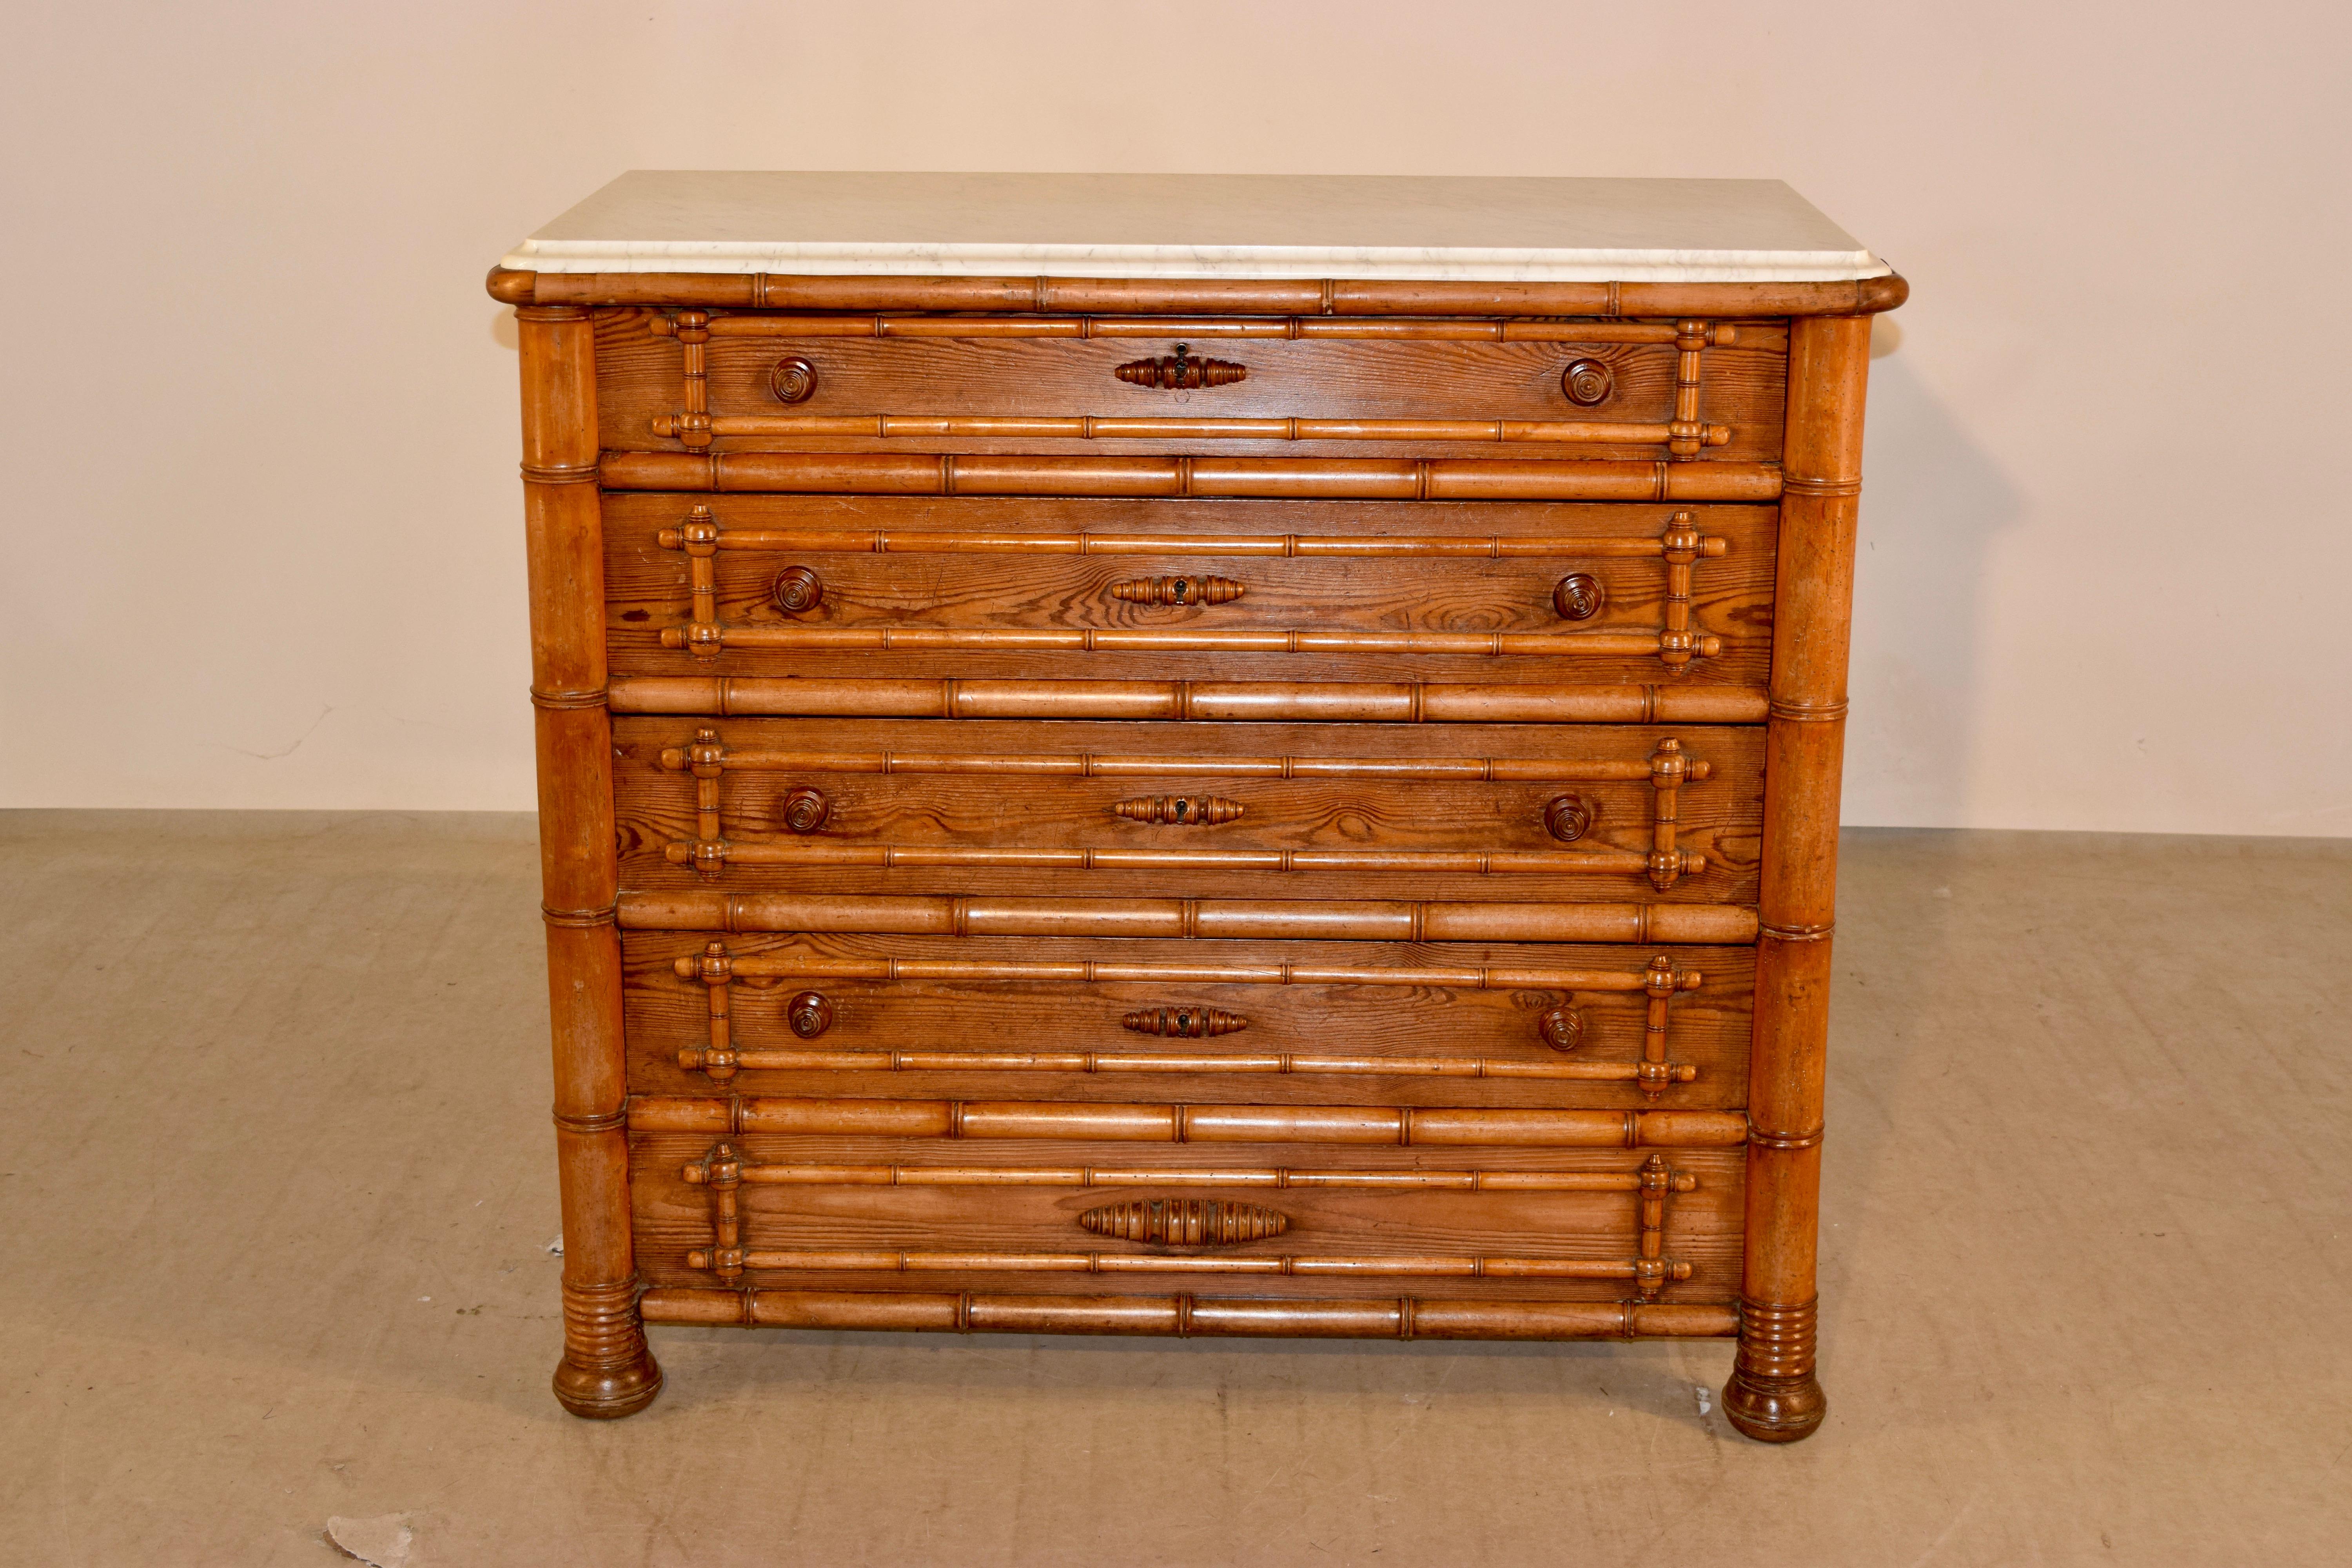 19th century faux bamboo pine and cherry chest of drawers from France. The top is made from Carrara marble and has a molded edge, which fits into the top faux bamboo hand turned molding of the piece. This follows down to four drawers in the front,